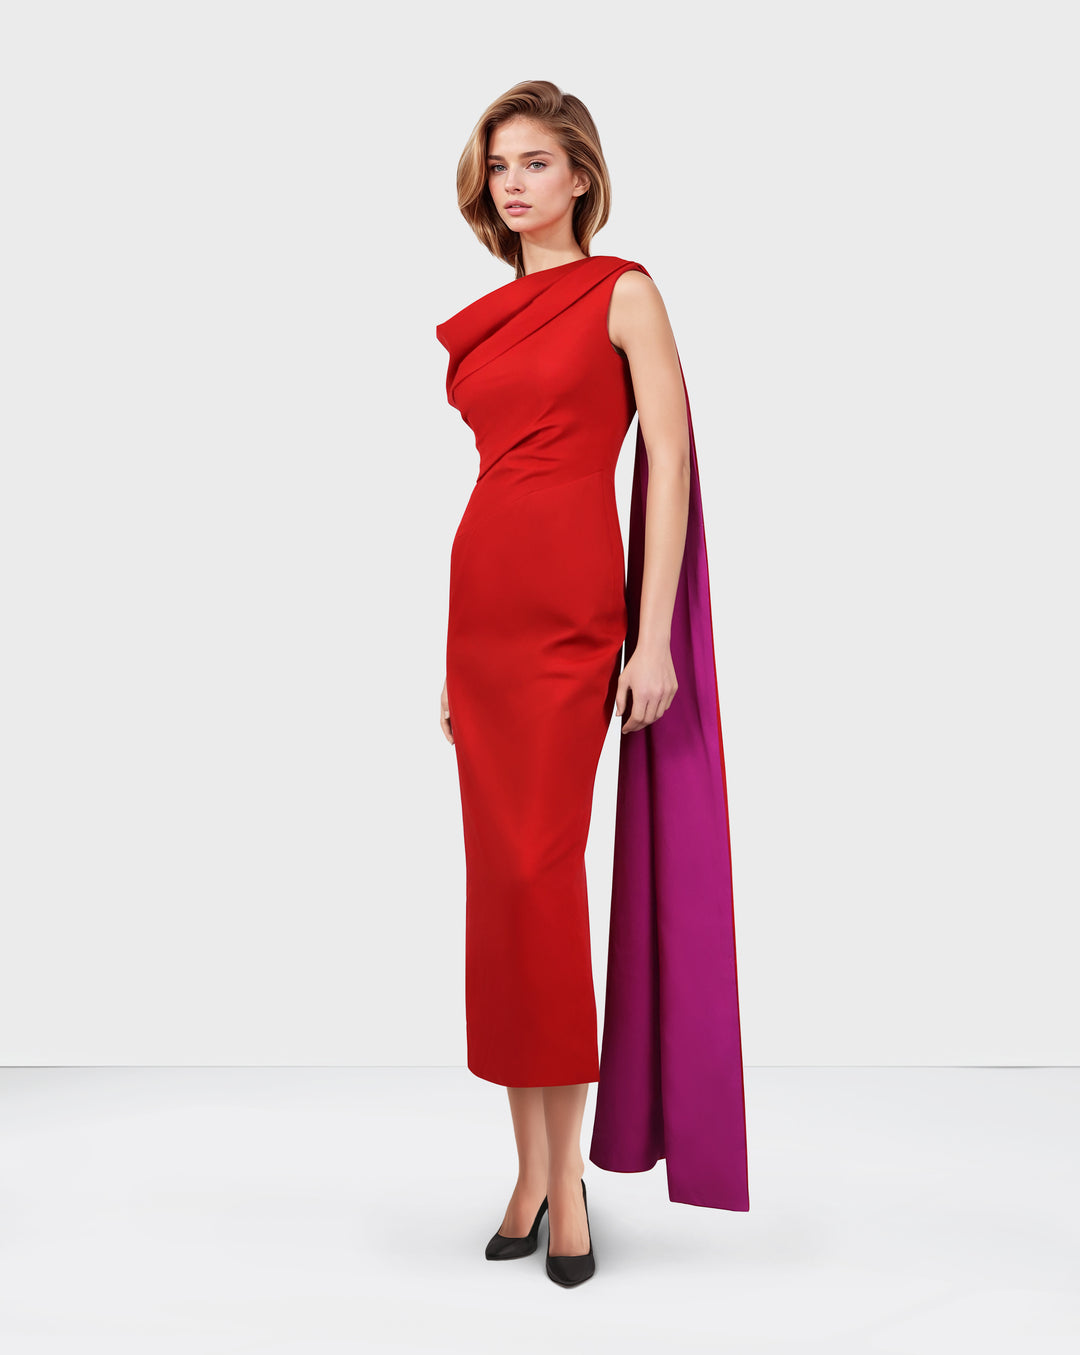 Red shoulder off dress with side cape - ROLOH